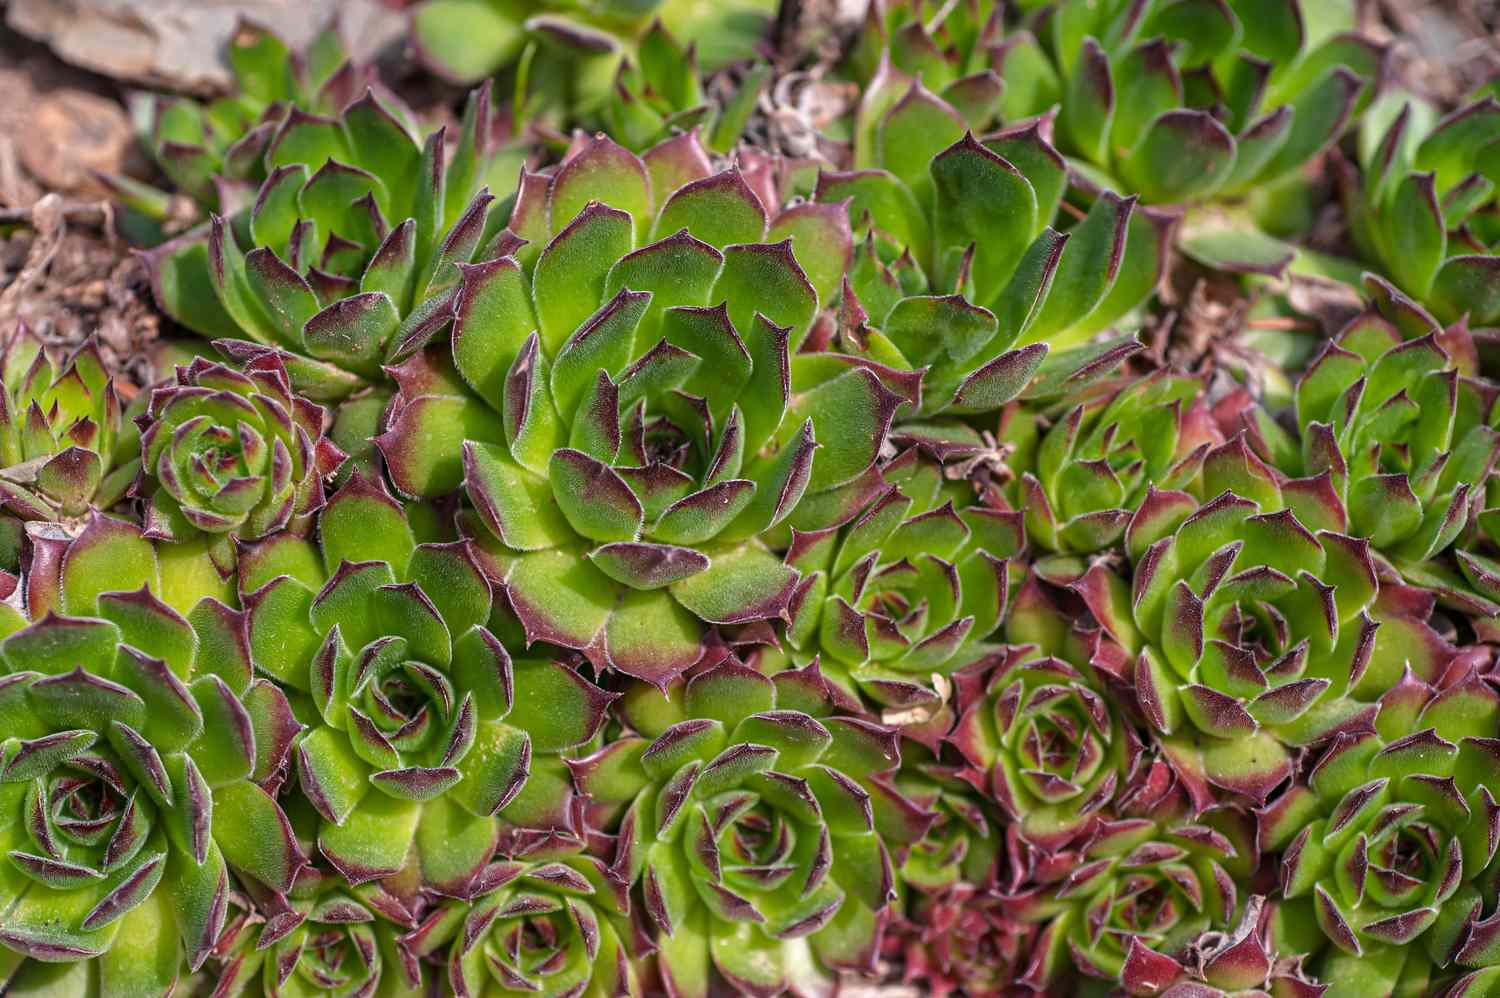 Hens and chicks succulent with green leaves and pink tips clustered together